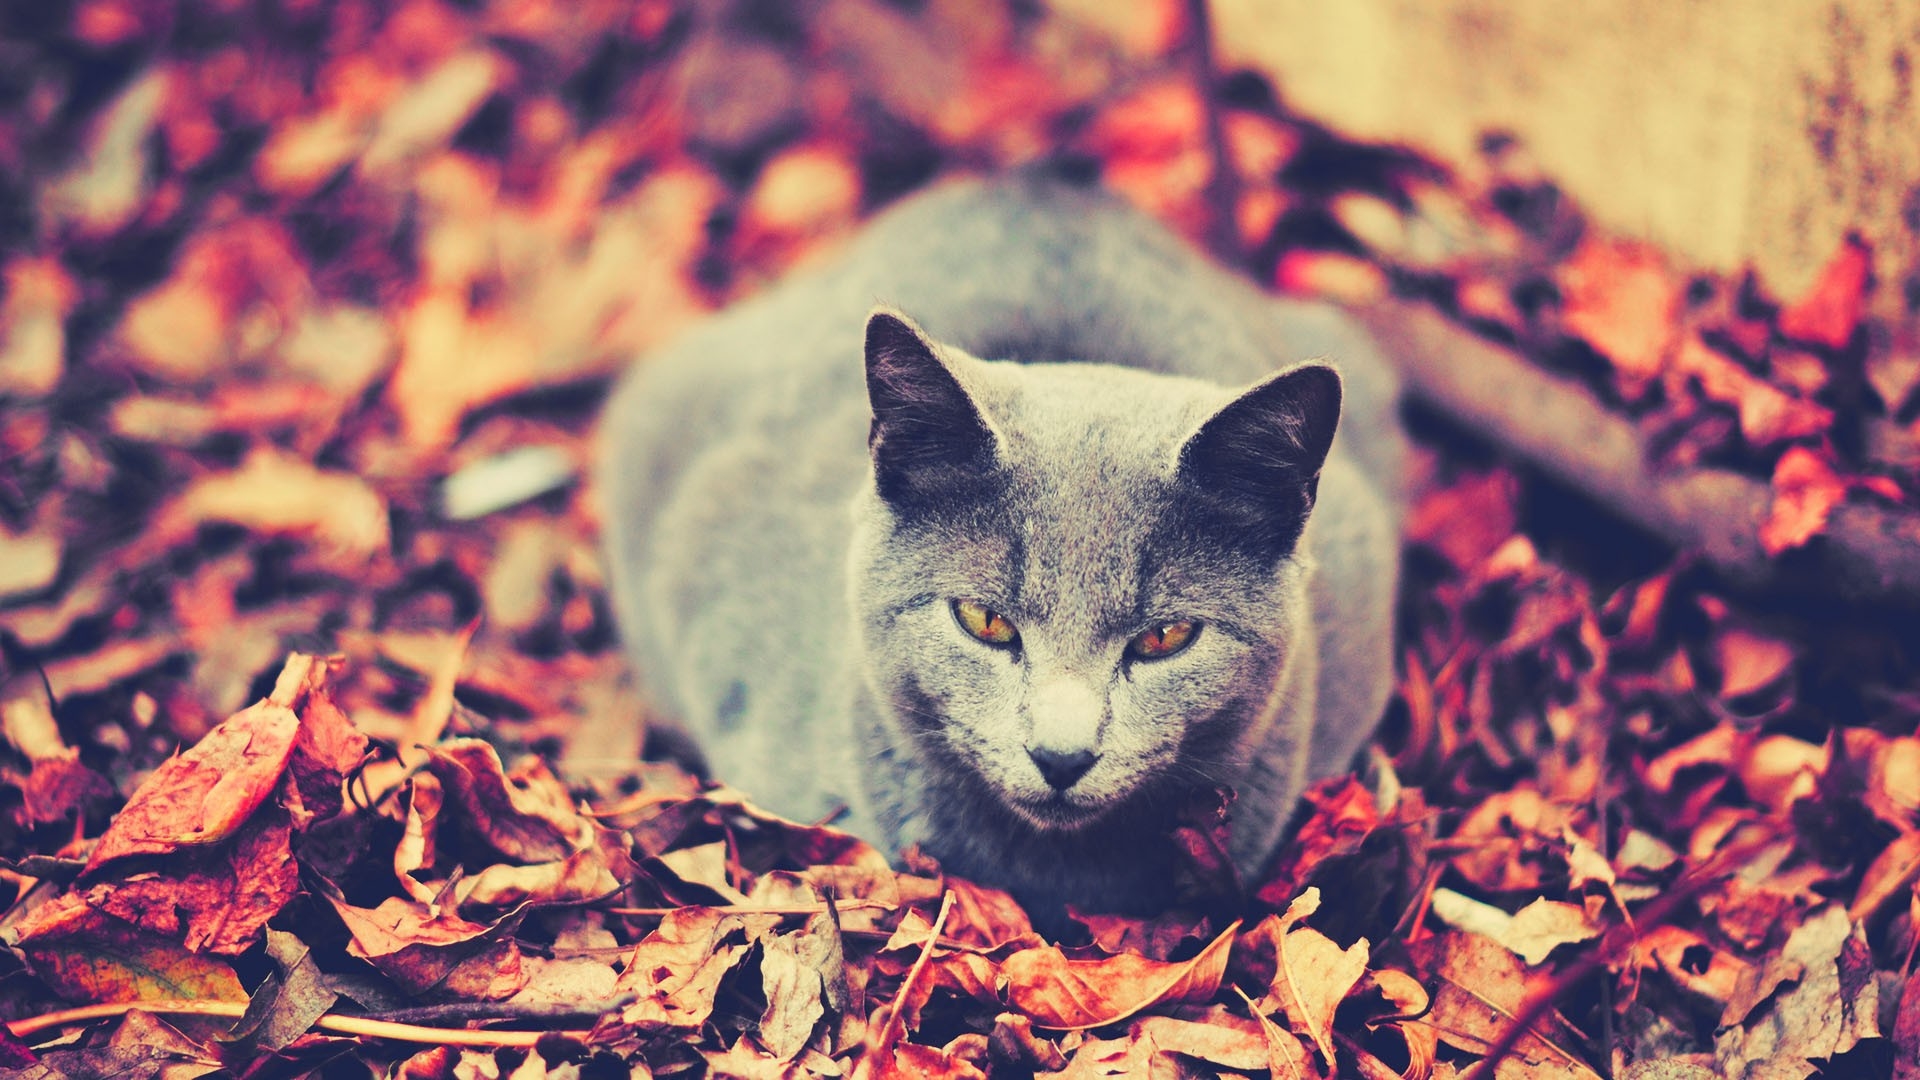 A gray cat sits on fallen leaves